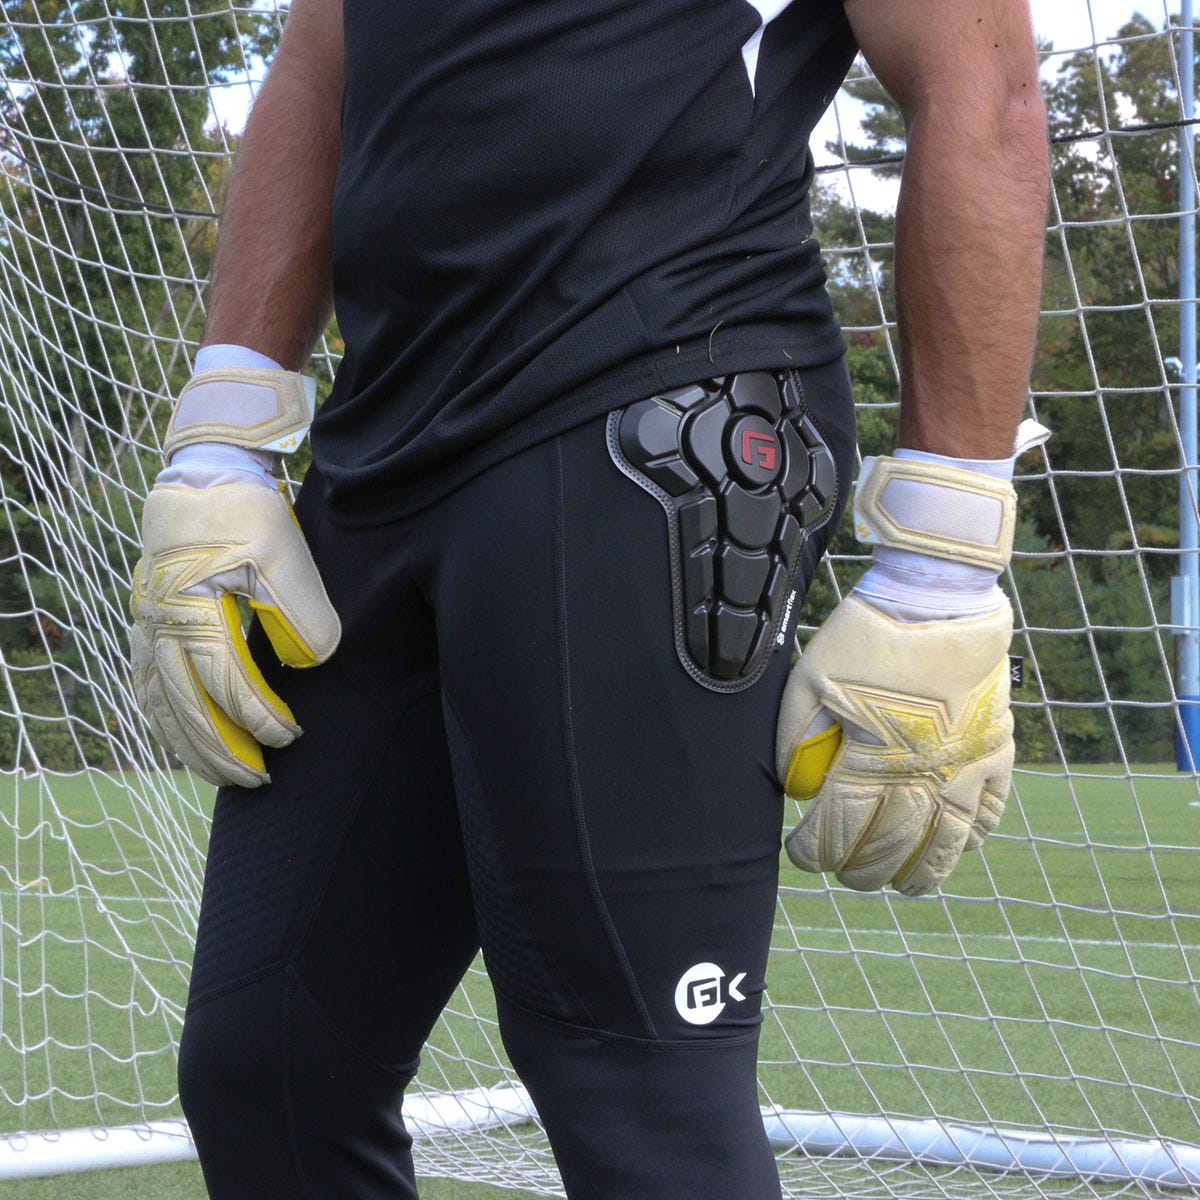 Soccer Goalie Goalkeeper Protective Padded Shorts and Pants Thermal Compression